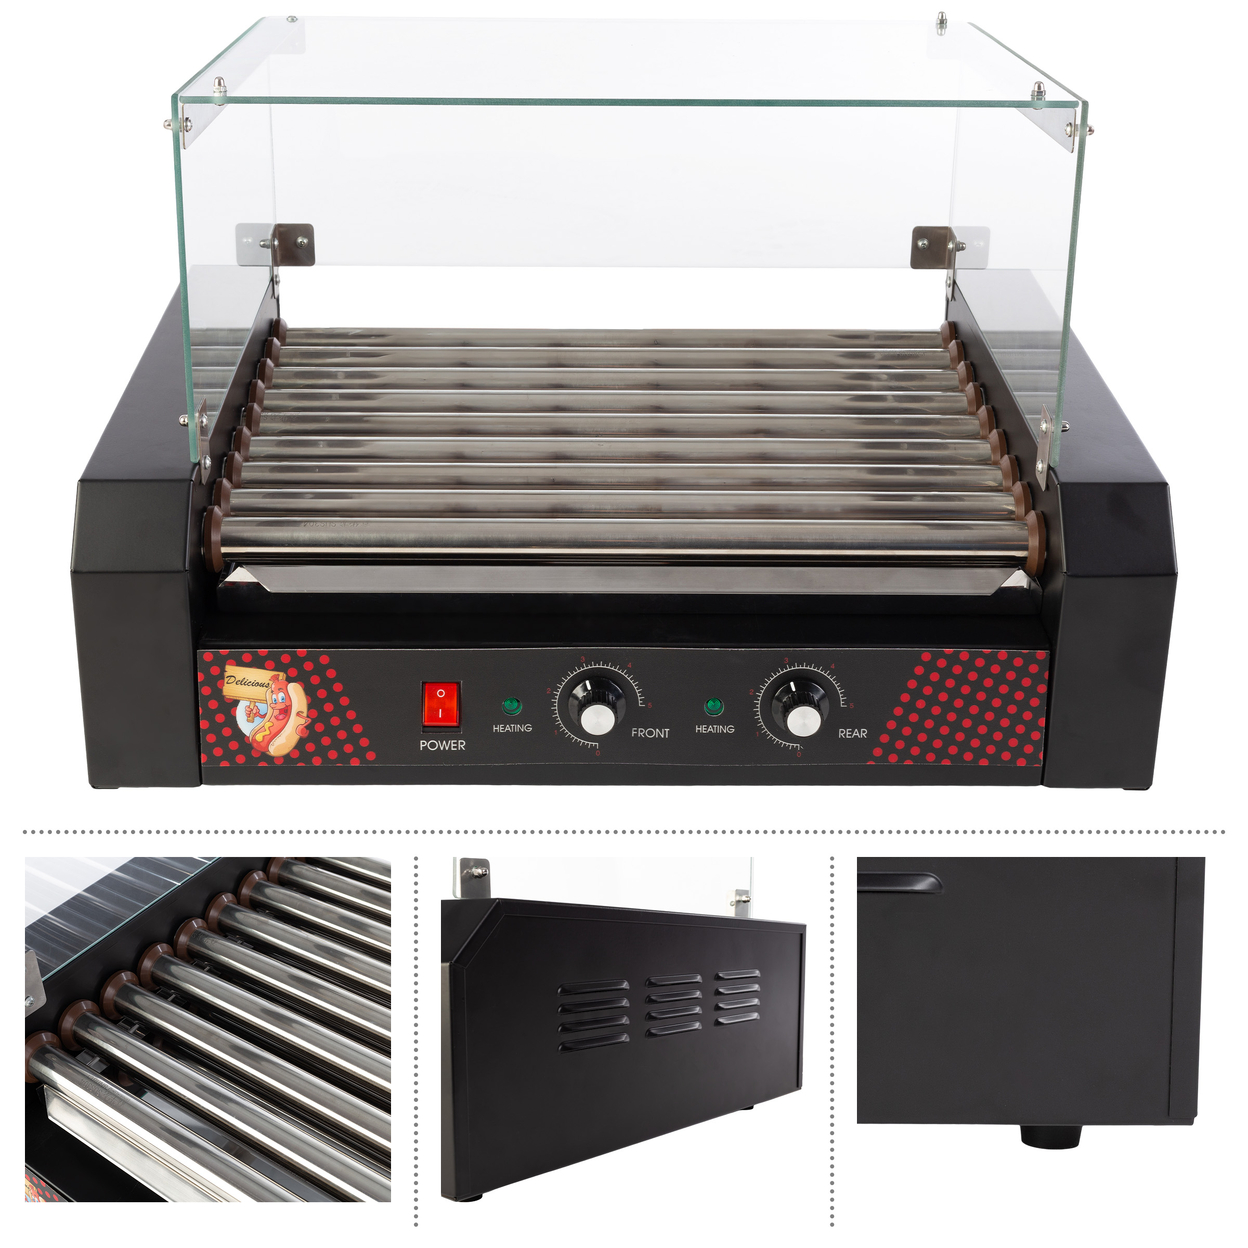 Hot Dog Roller Machine With Cover 1170W Stainless Cooker 24 Hotdog Capacity